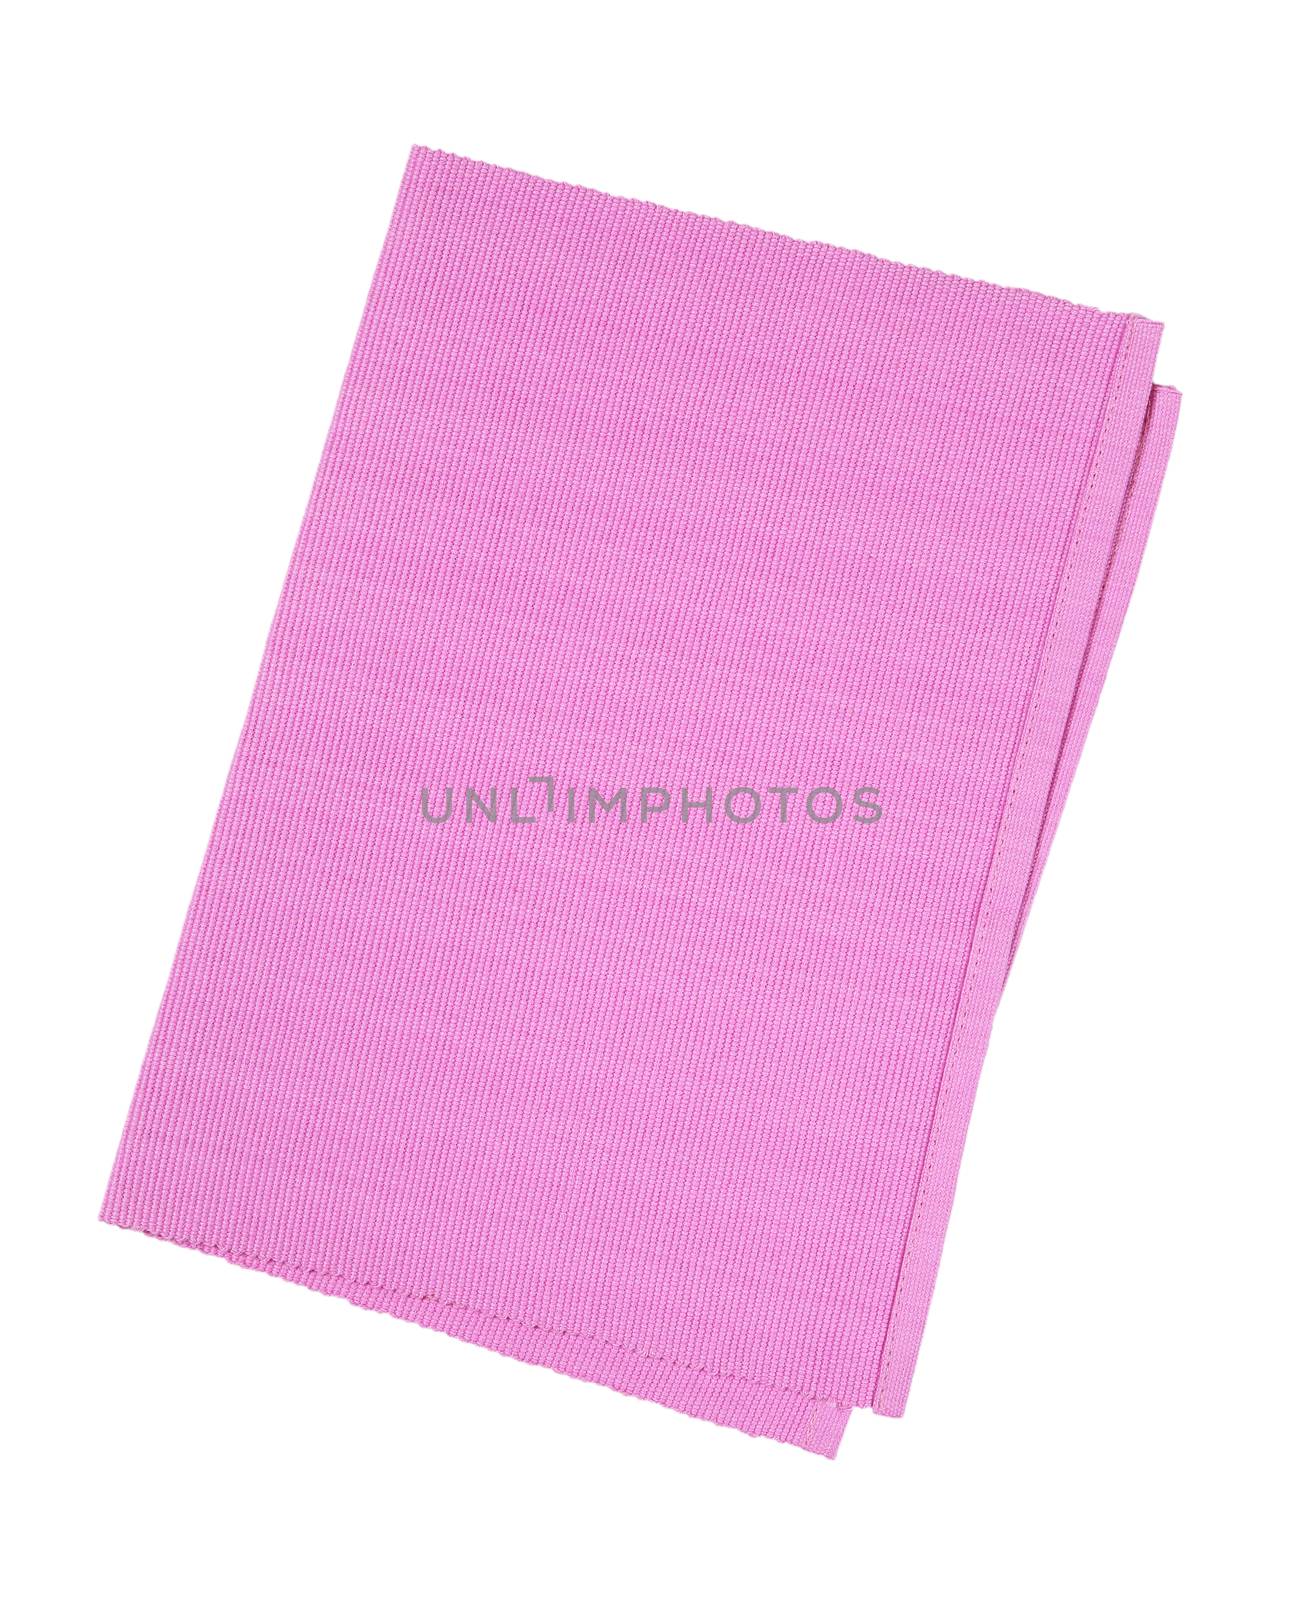 Pink woven cotton place mat folded in half isolated on white